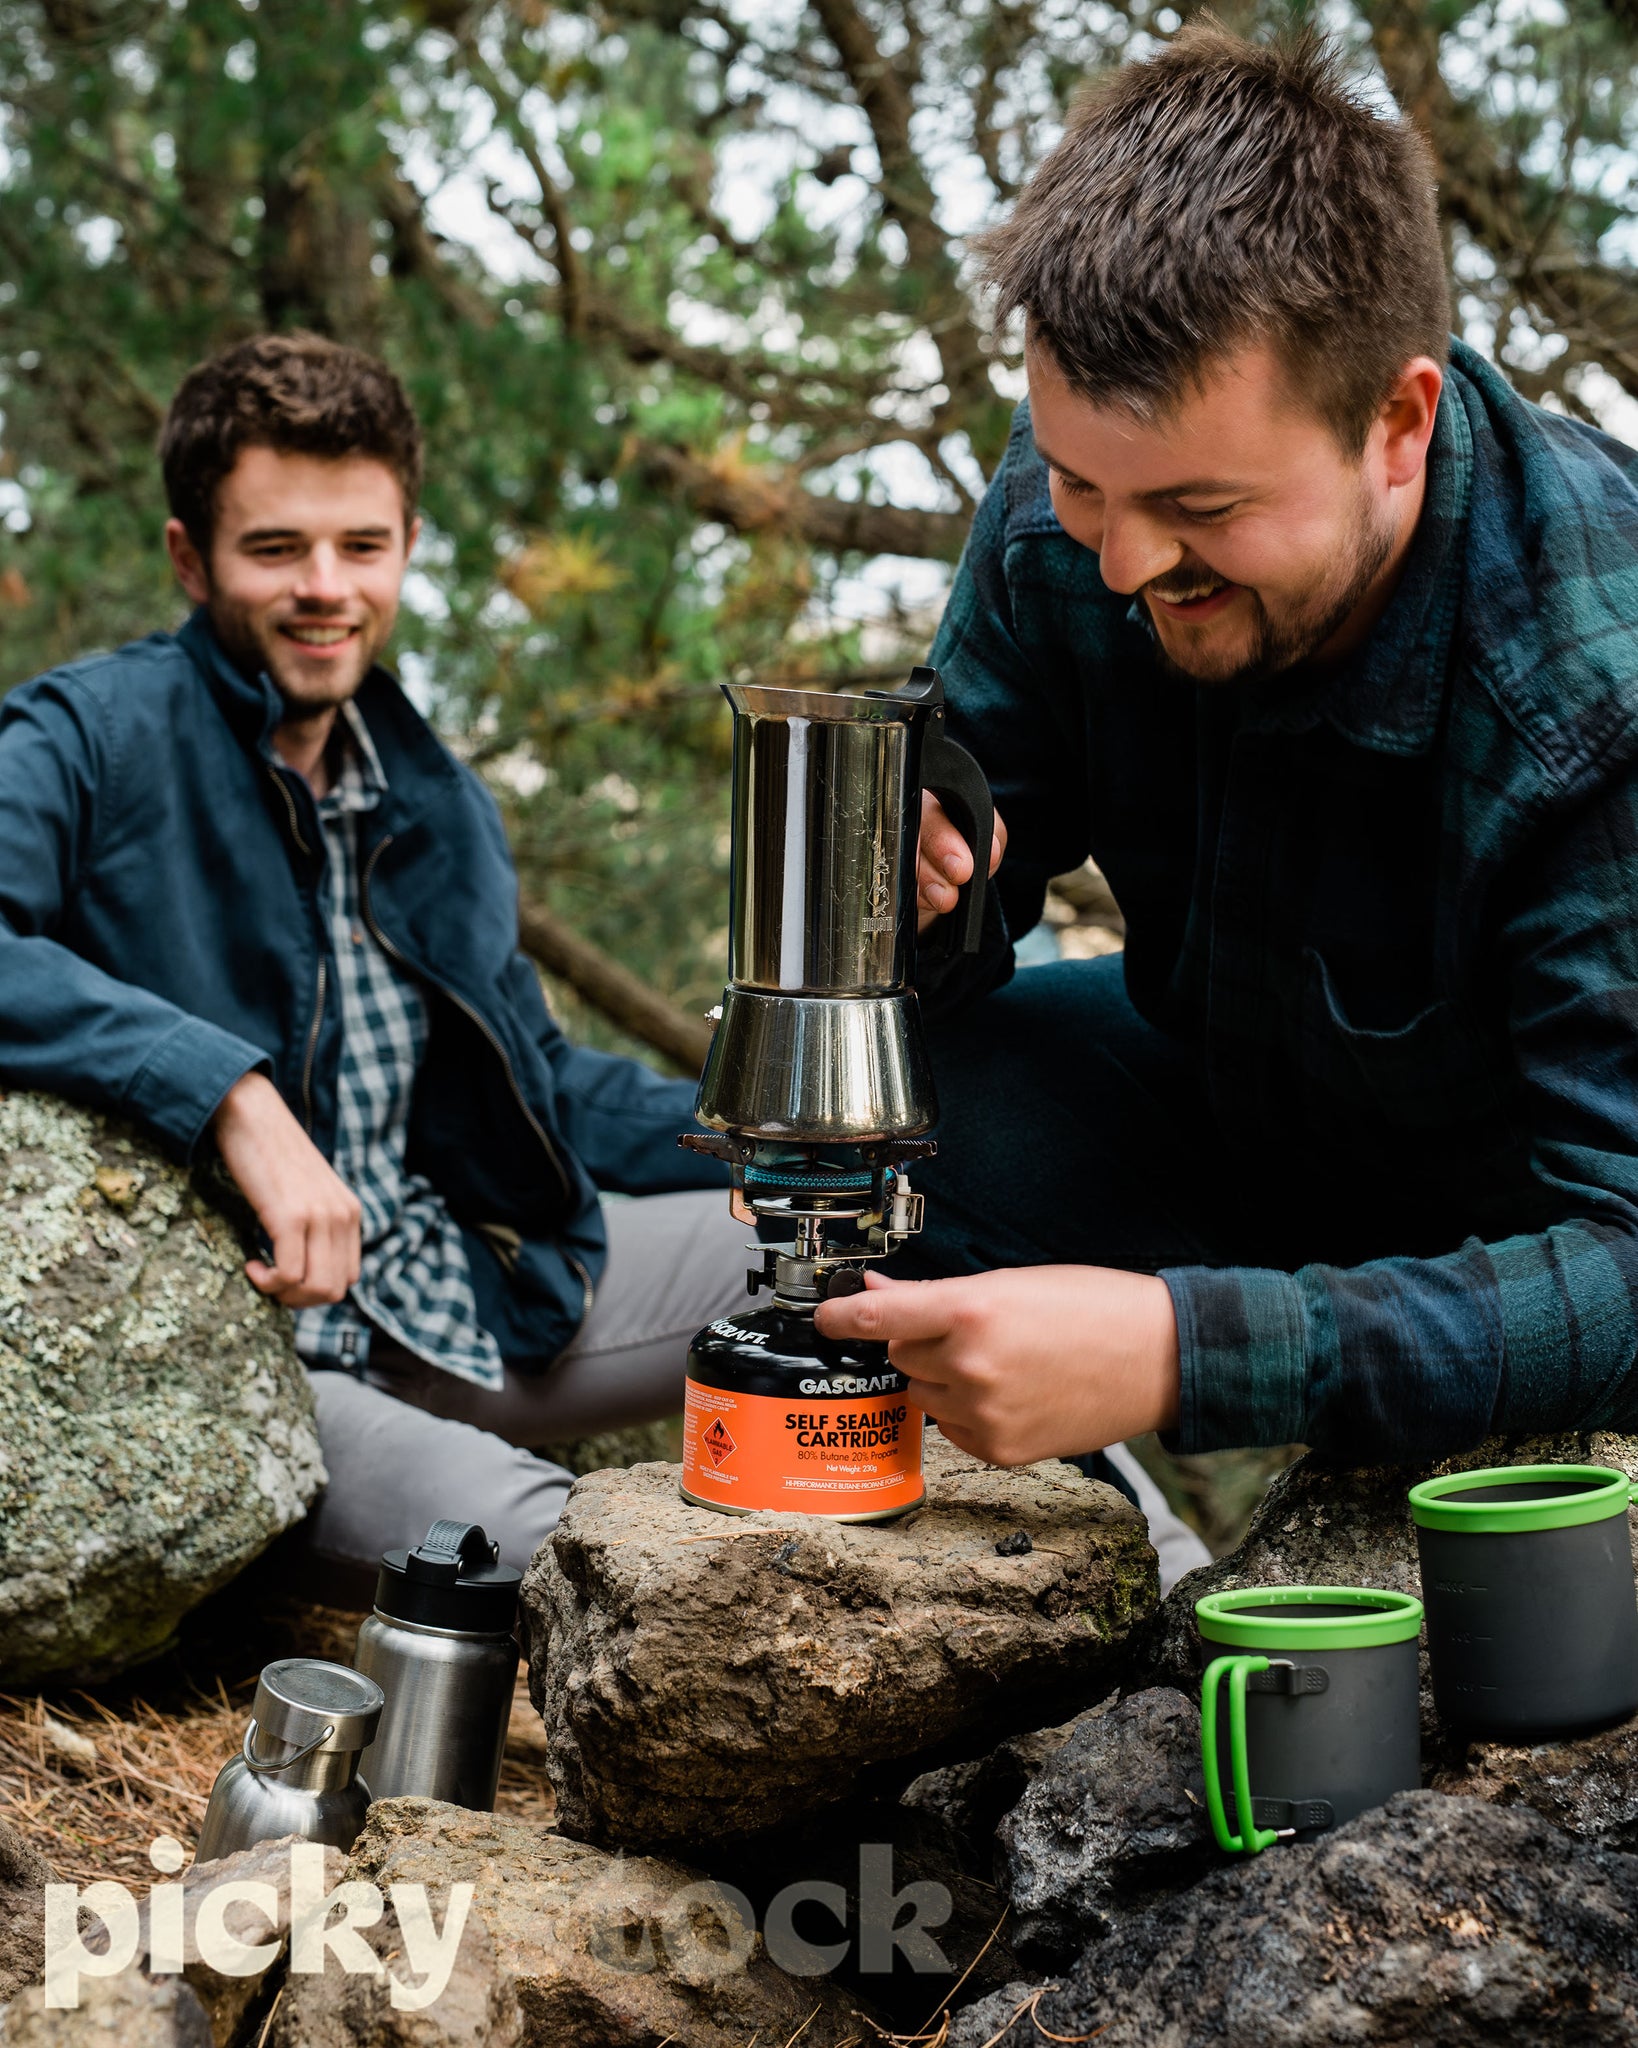 Two friends making a coffee in the outdoors together. One man with brown hair smiling looking down at coffee stainless steel maker. Lighting the gas. Other man also in a blue jacket watching in the background. Two mugs in the foreground right of frame